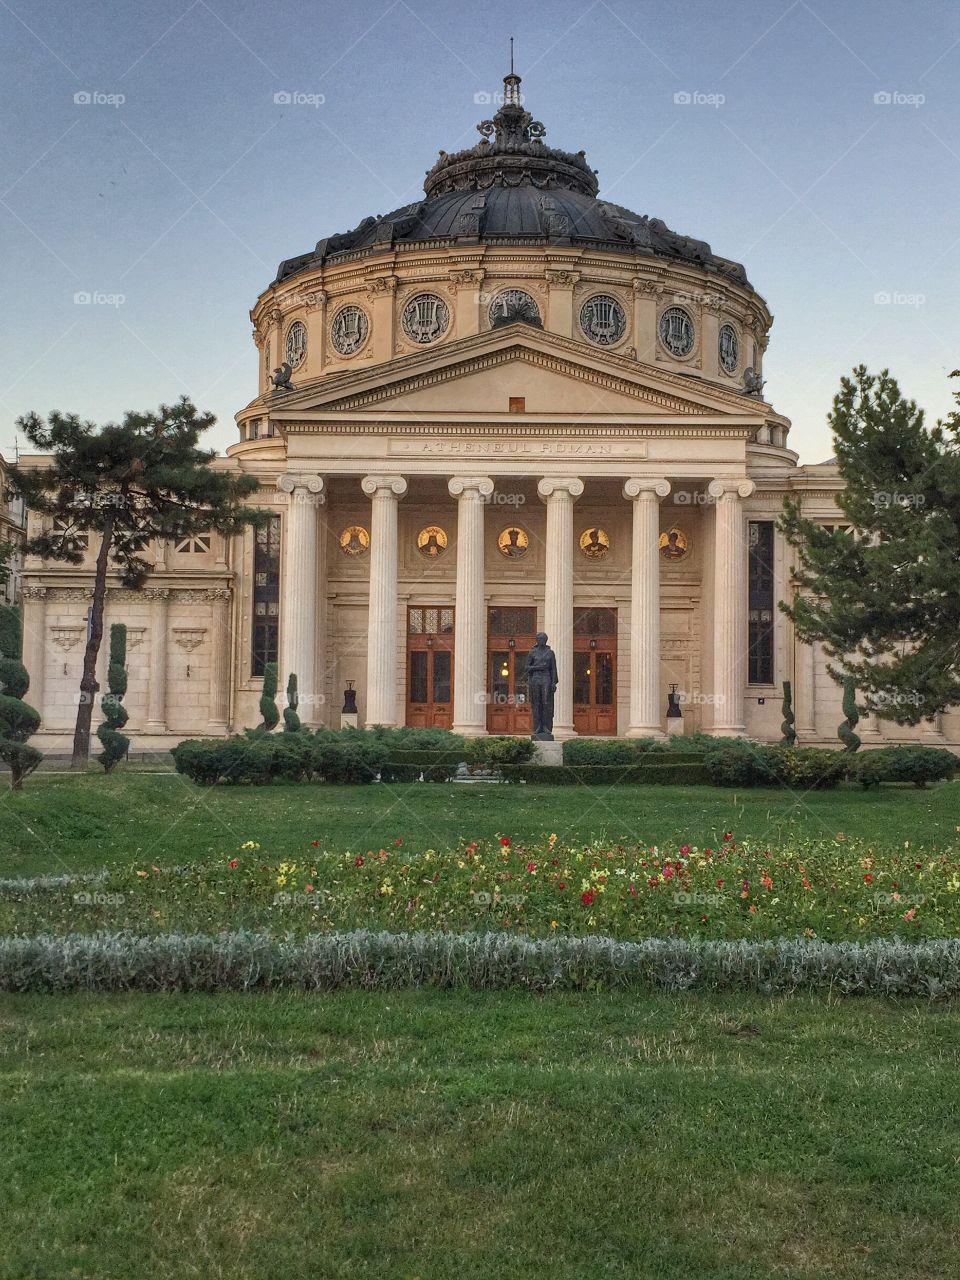 The Romanian Athenaeum. View over the Romanian Athenaeum building, old concert hall in Bucharest, Romania